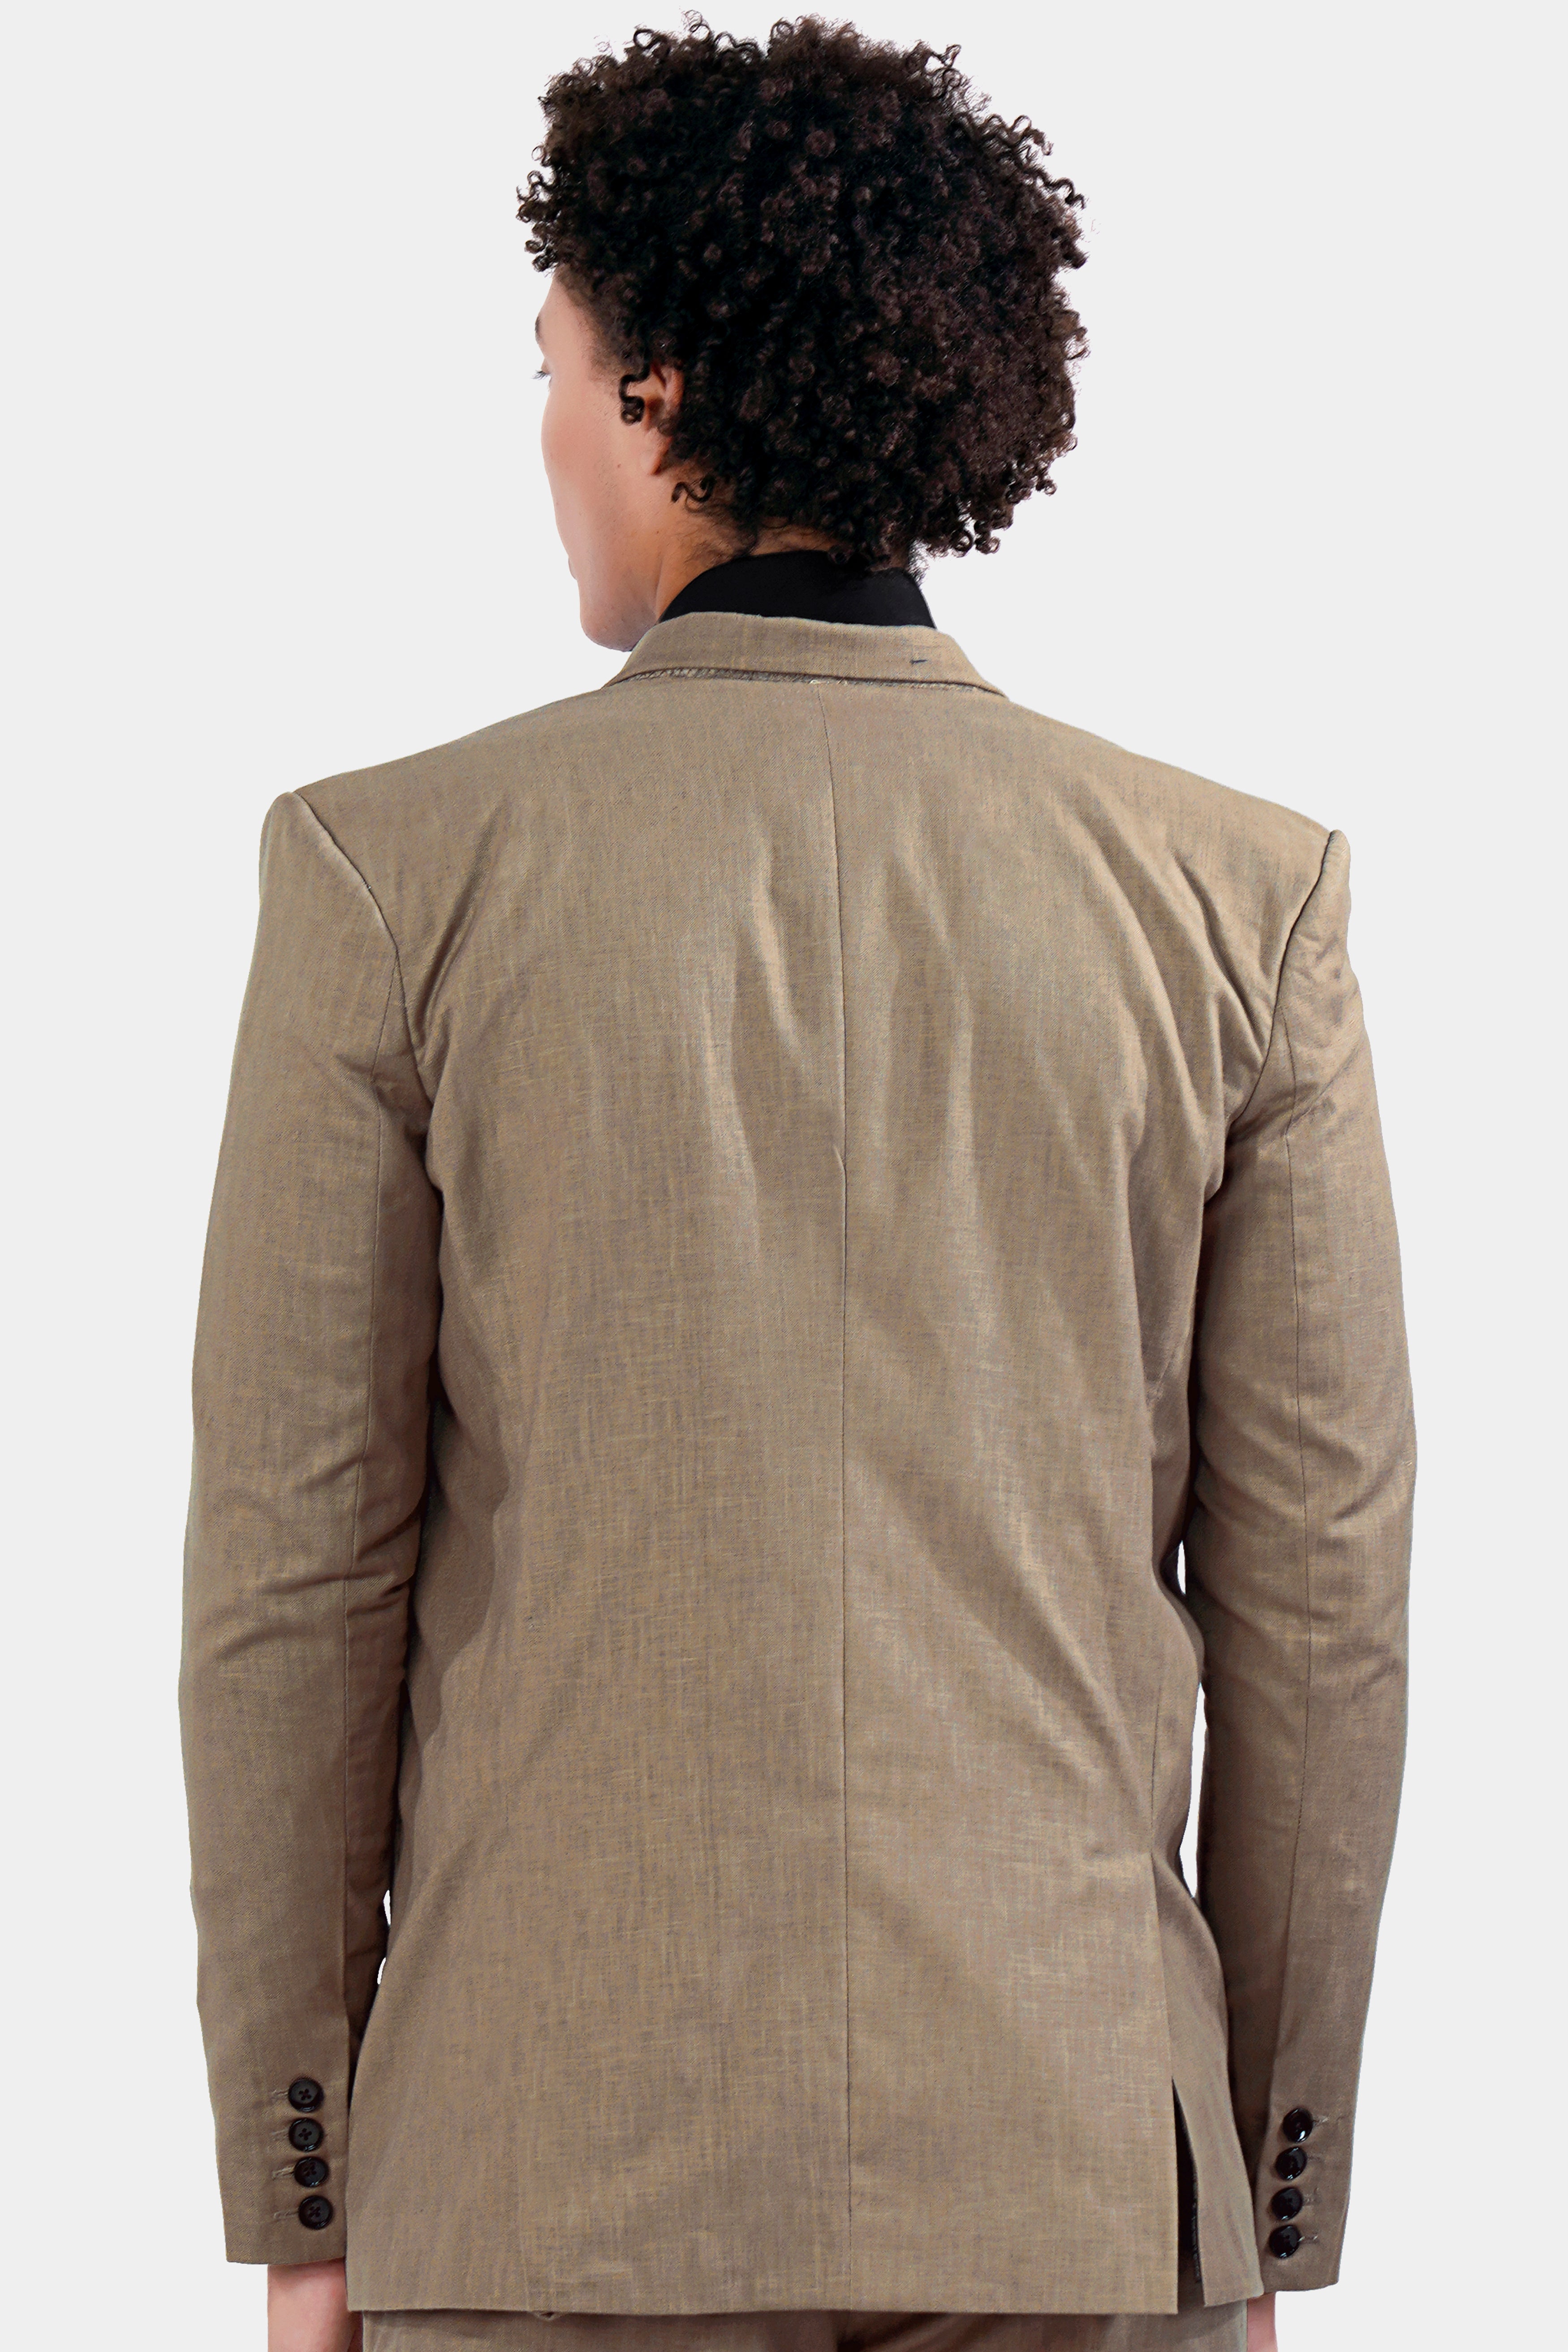 Sandrift Brown Luxurious Linen Double Breasted Sports Blazer BL2926-DB-PP-36, BL2926-DB-PP-38, BL2926-DB-PP-40, BL2926-DB-PP-42, BL2926-DB-PP-44, BL2926-DB-PP-46, BL2926-DB-PP-48, BL2926-DB-PP-50, BL2926-DB-PP-52, BL2926-DB-PP-54, BL2926-DB-PP-56, BL2926-DB-PP-58, BL2926-DB-PP-60